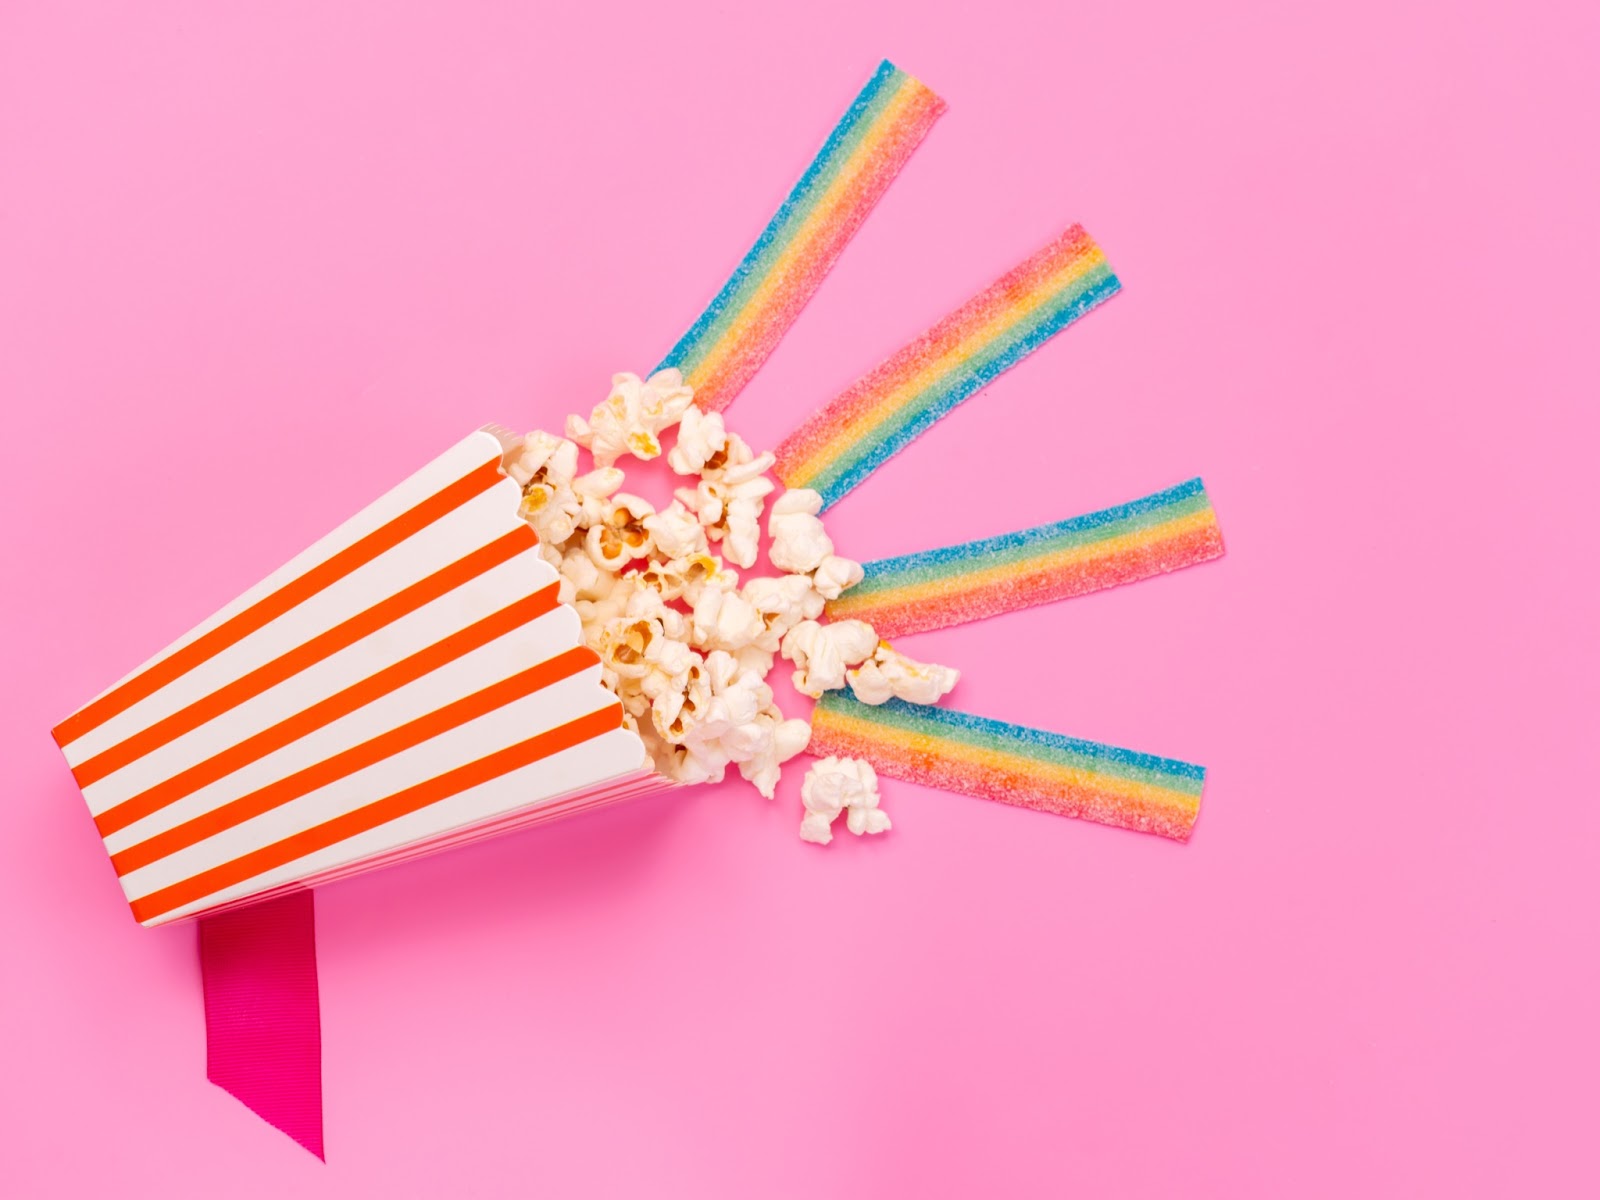 Popcorn and candy displayed to look like a megaphone in action.